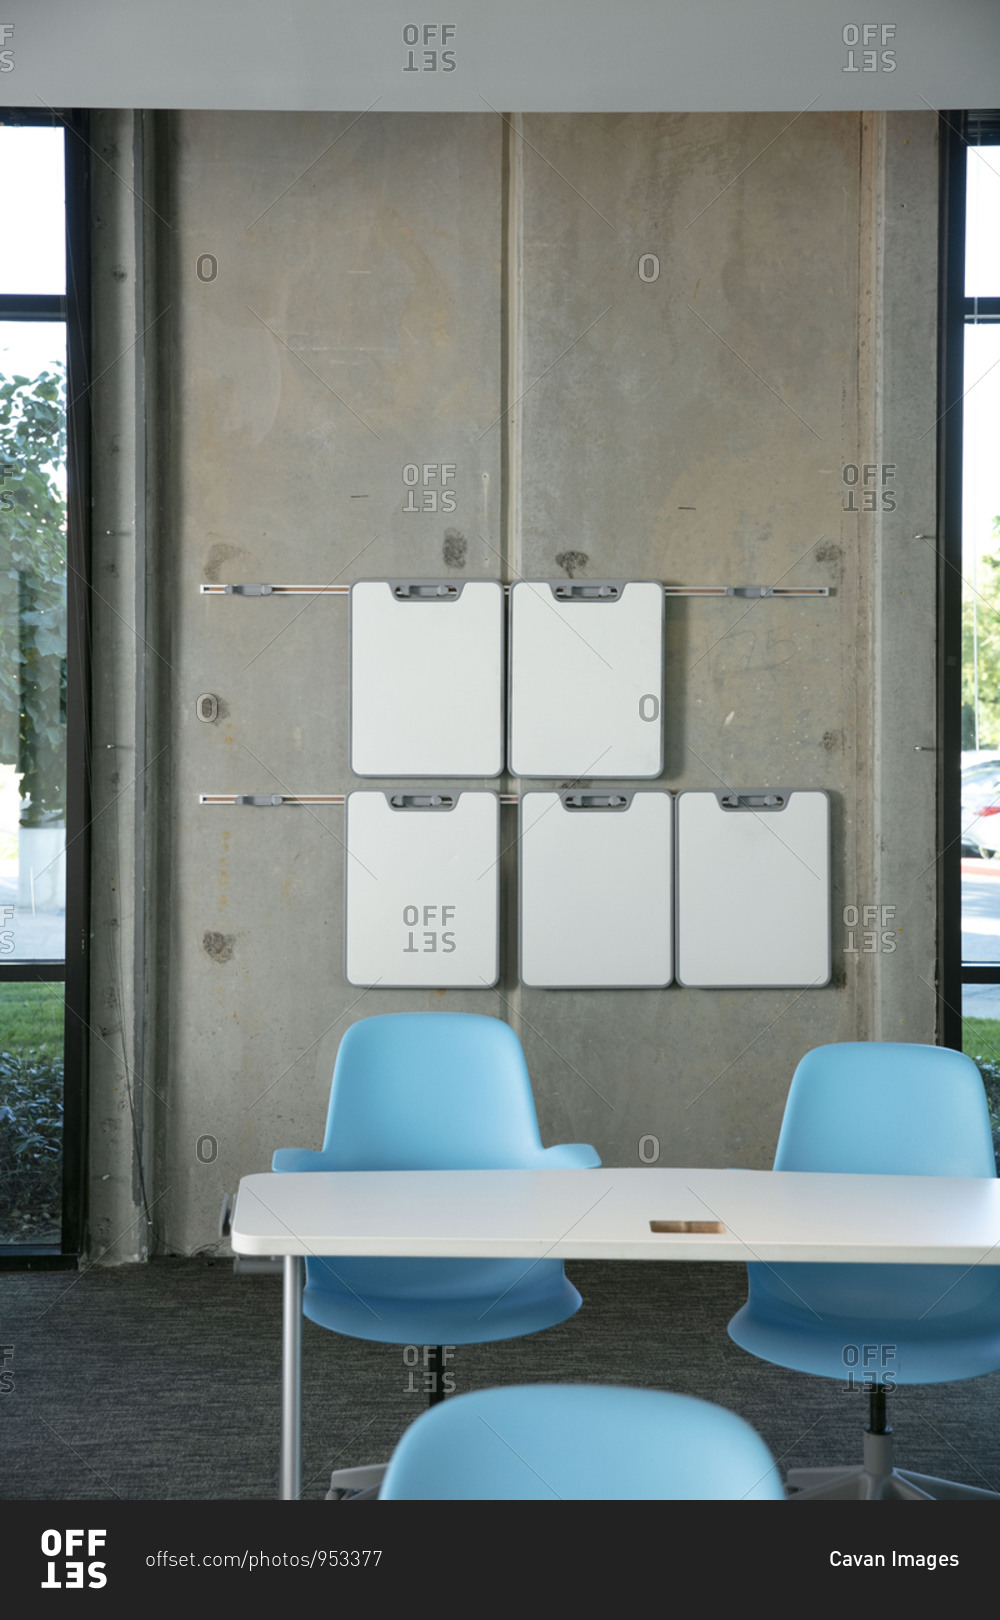 A classroom with white dry erase boards hanging from the wall